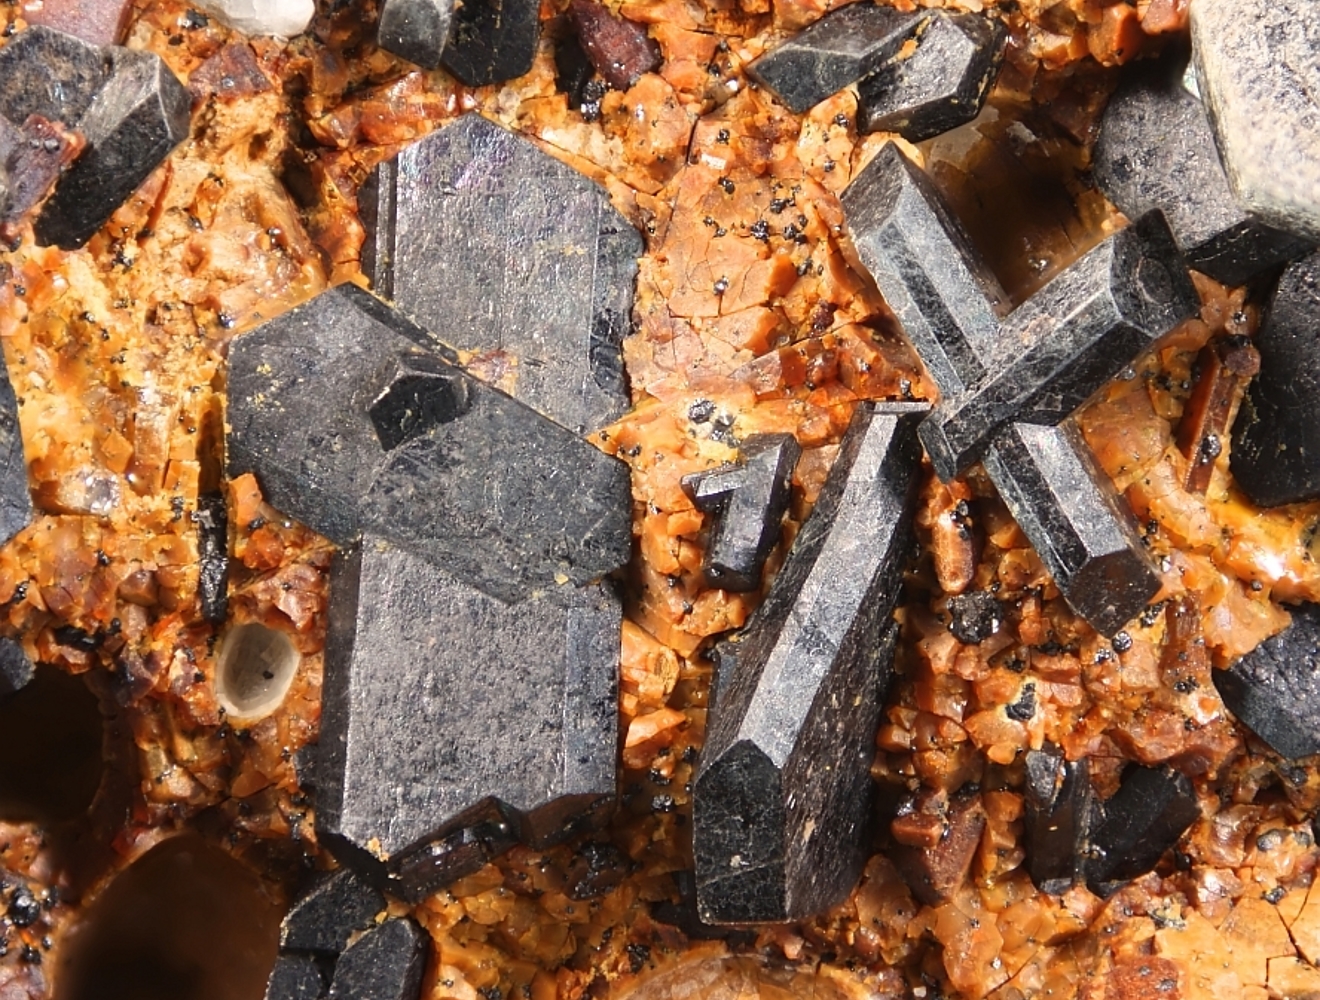 Augite: Mineral information, data and localities.